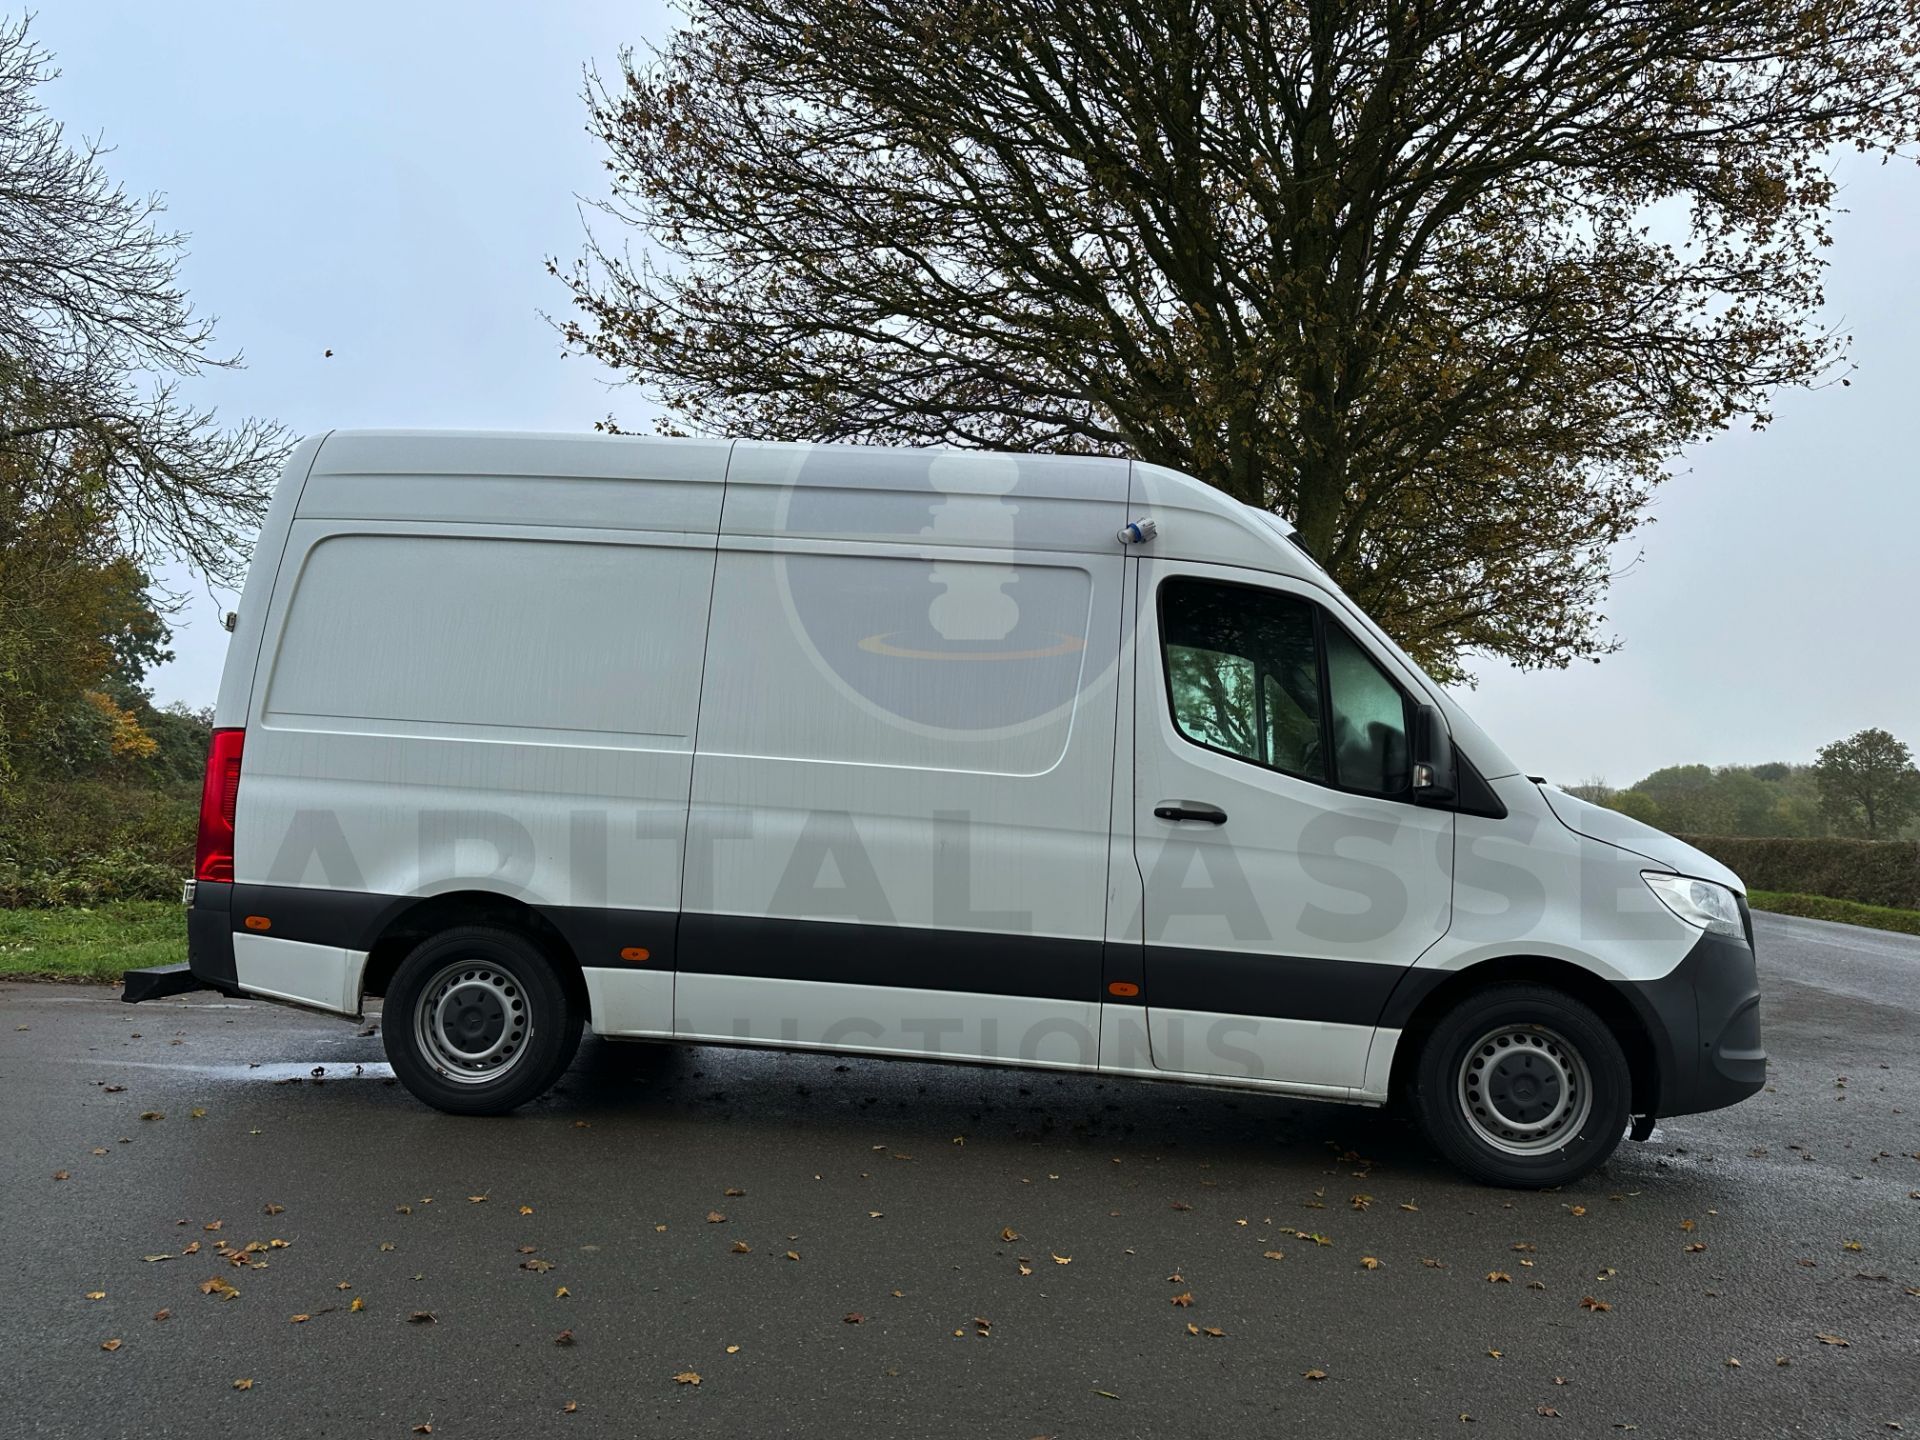 MERCEDES-BENZ SPRINTER 314 CDI *MWB - REFRIGERATED VAN* (2019 - FACELIFT MODEL) *OVERNIGHT STANDBY* - Image 17 of 45